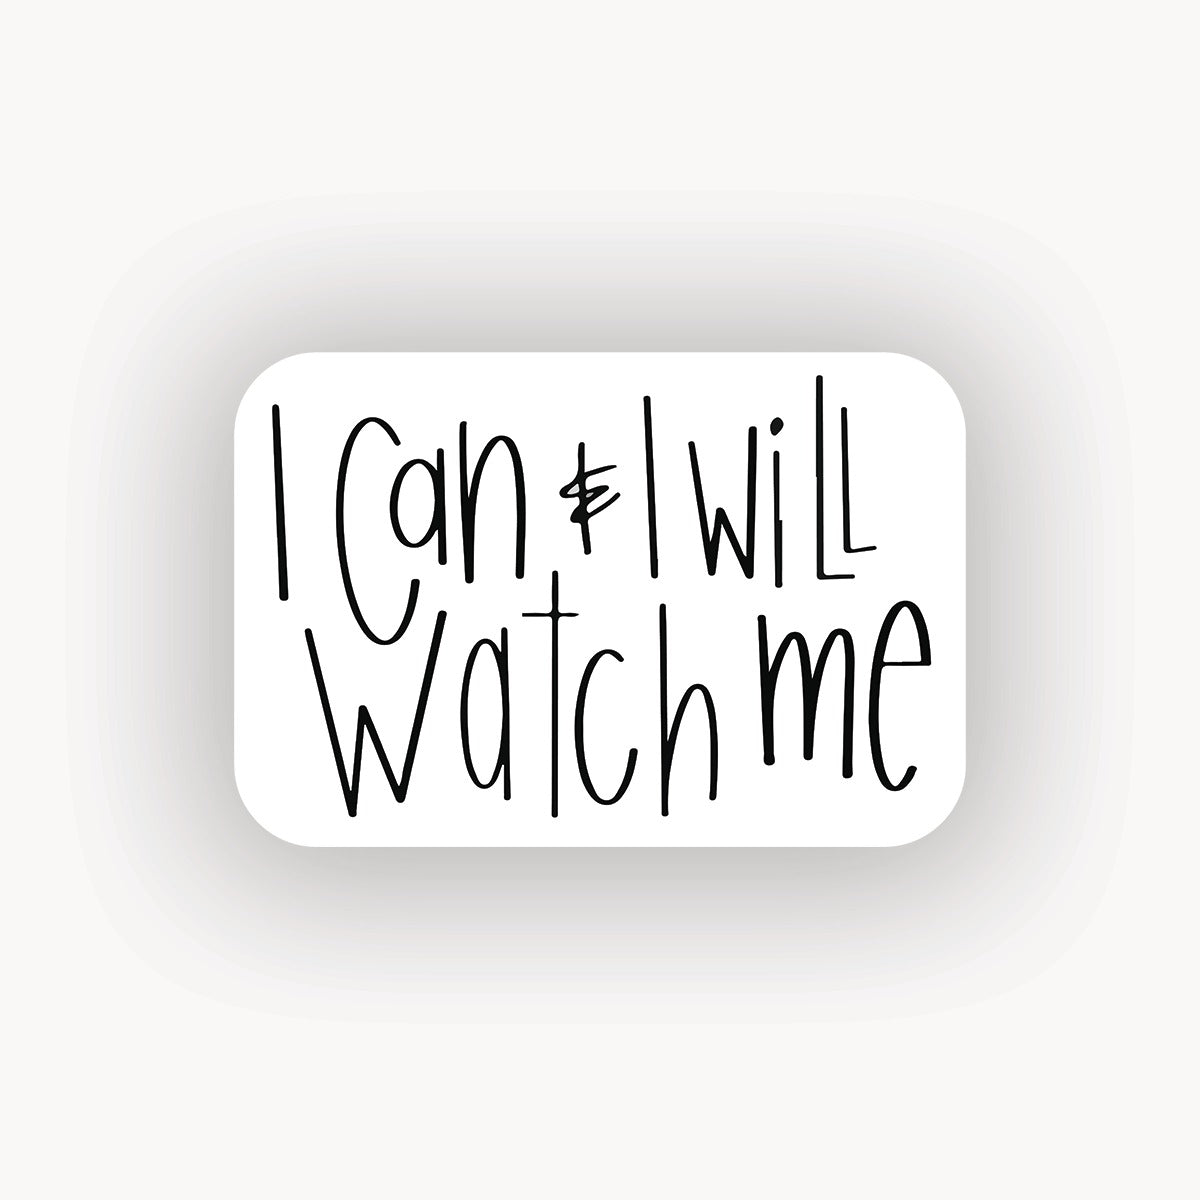 I can i will watch me